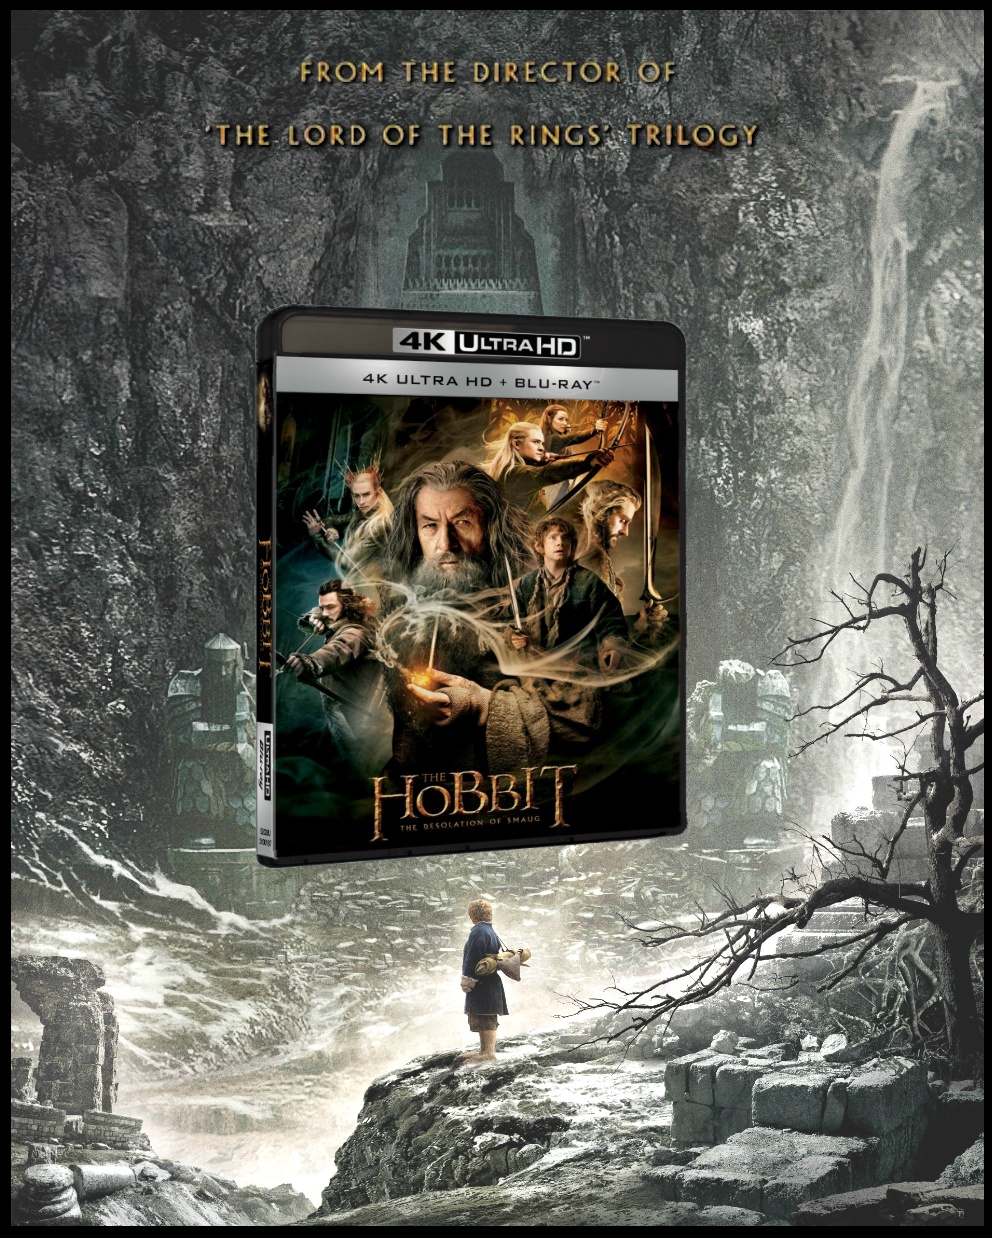 The Hobbit: The Desolation of Smaug box cover